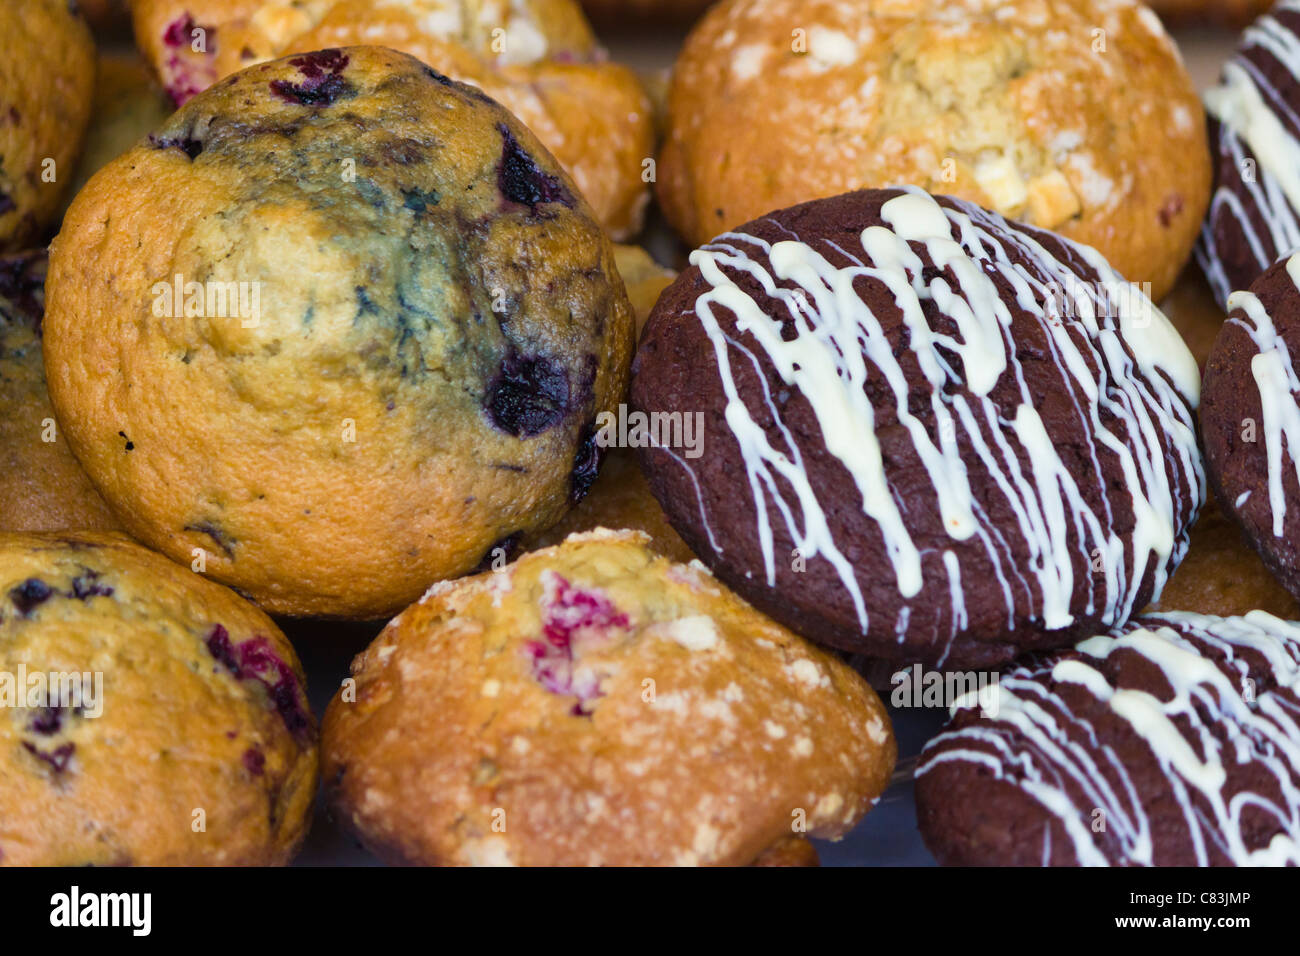 Desserts at a market stall in Borough Market. Stock Photo